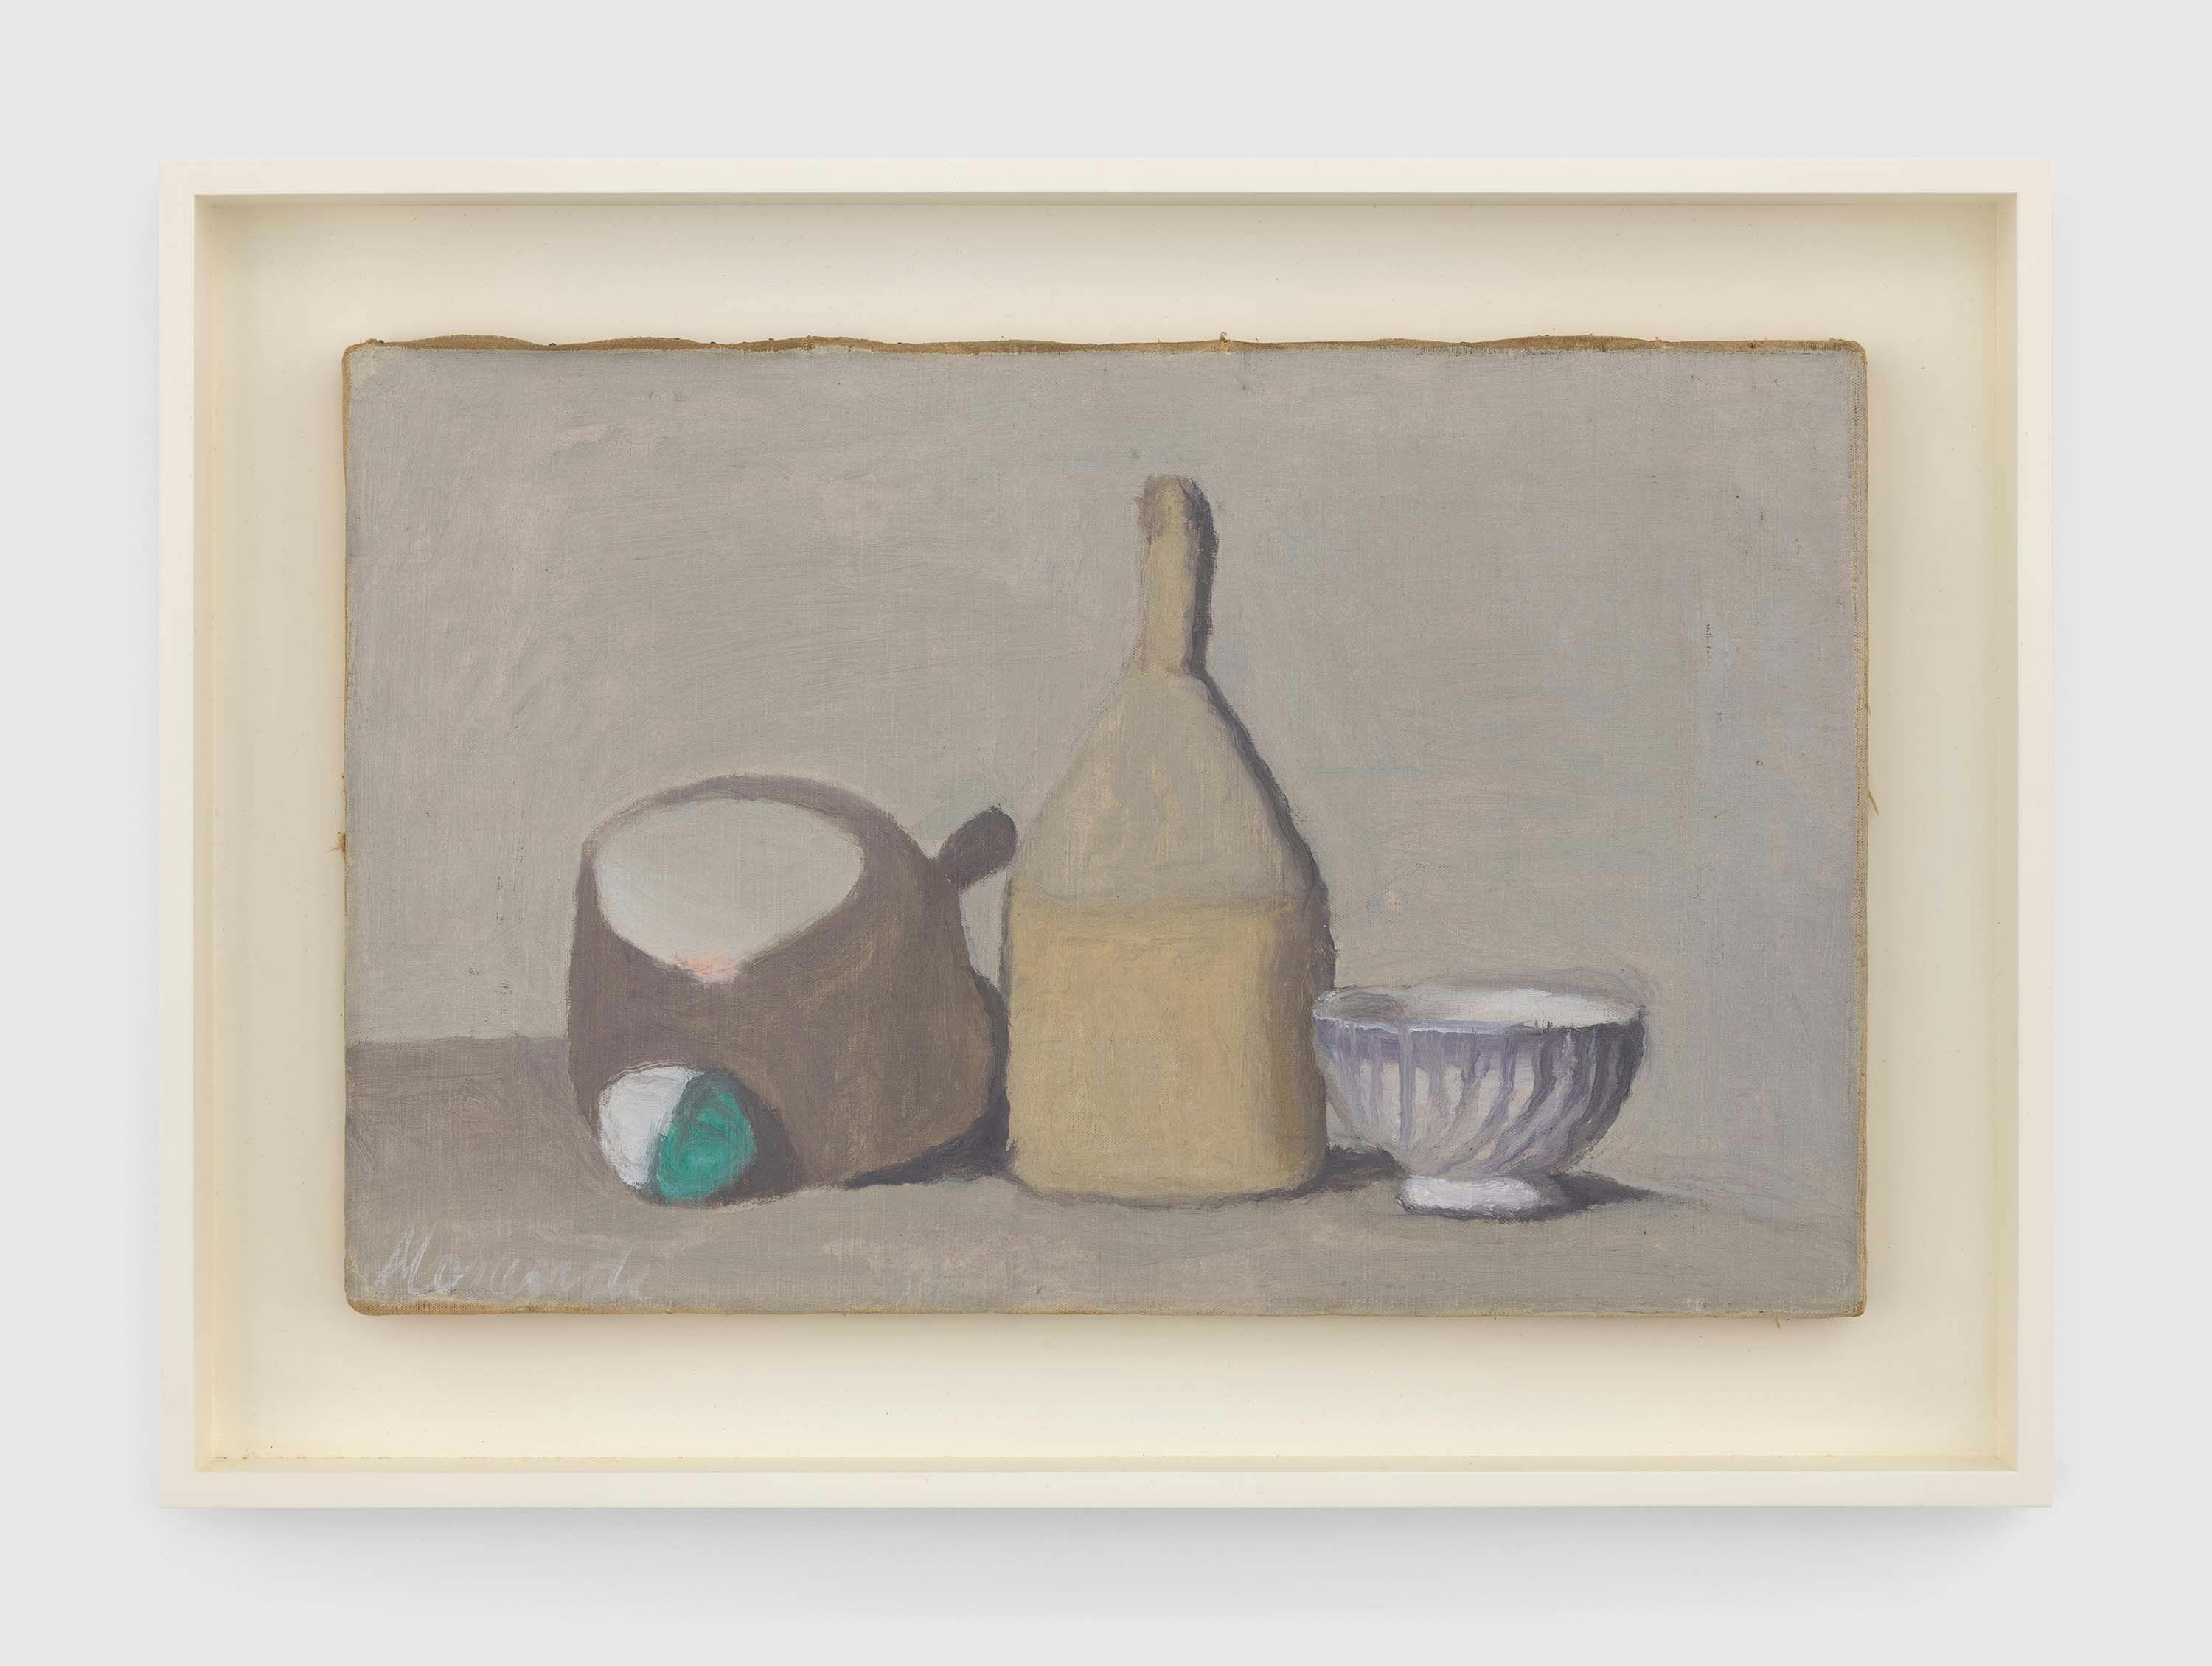 An oil painting on canvas by Giorgio Morandi, titled Natura morta (Still Life), dated 1946.